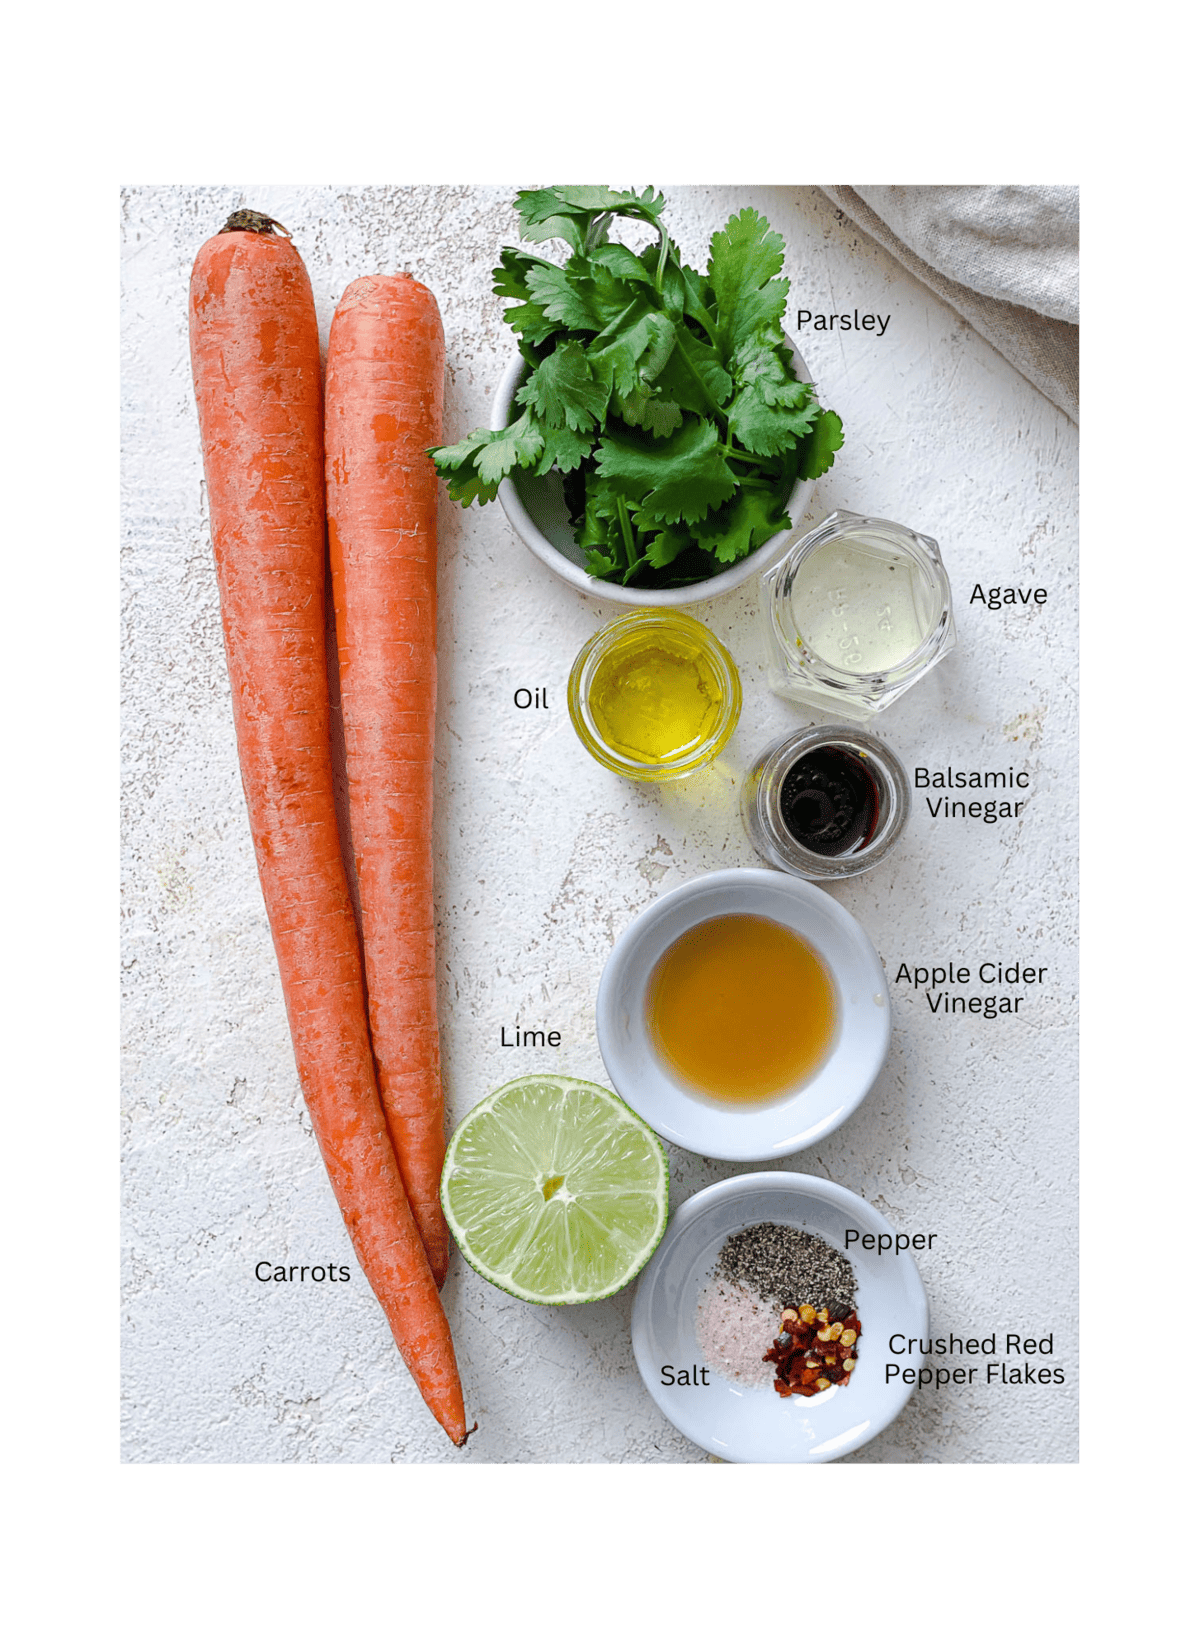 ingredients for Raw Carrot Salad measured out against a white surface